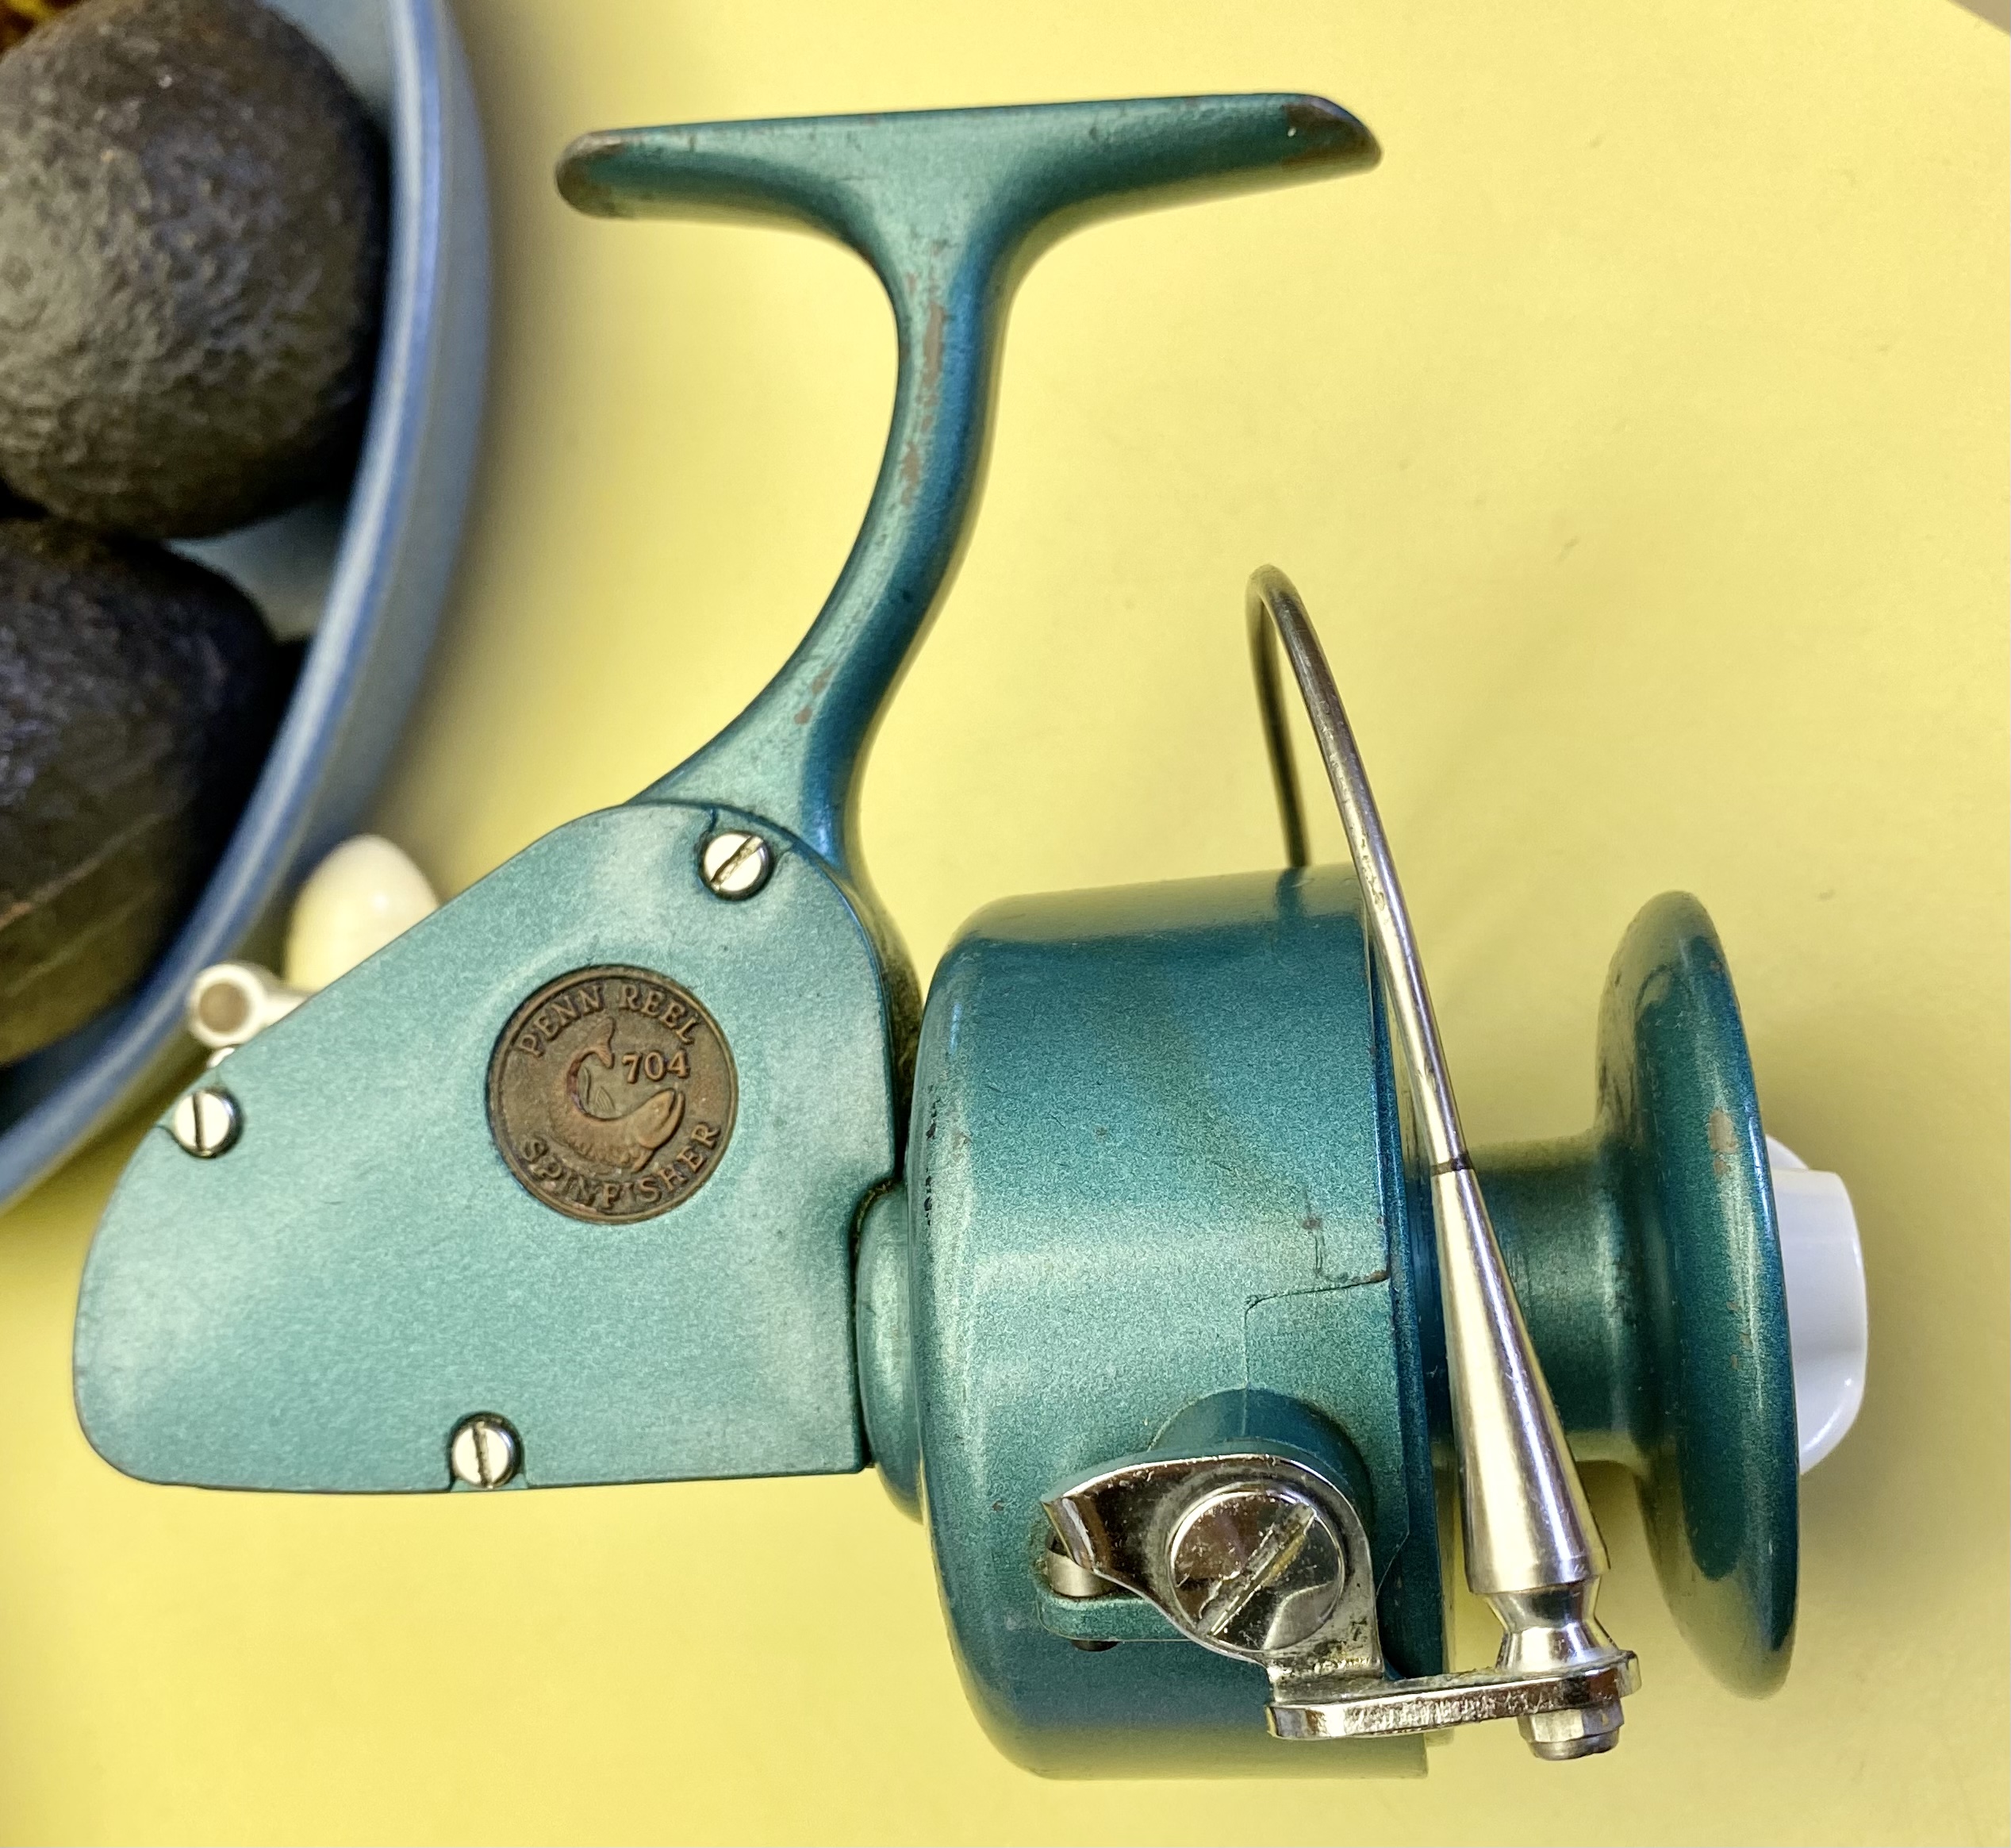 Sold at Auction: Vintage Penn 704 Greenie Spinfisher Spinning Reel